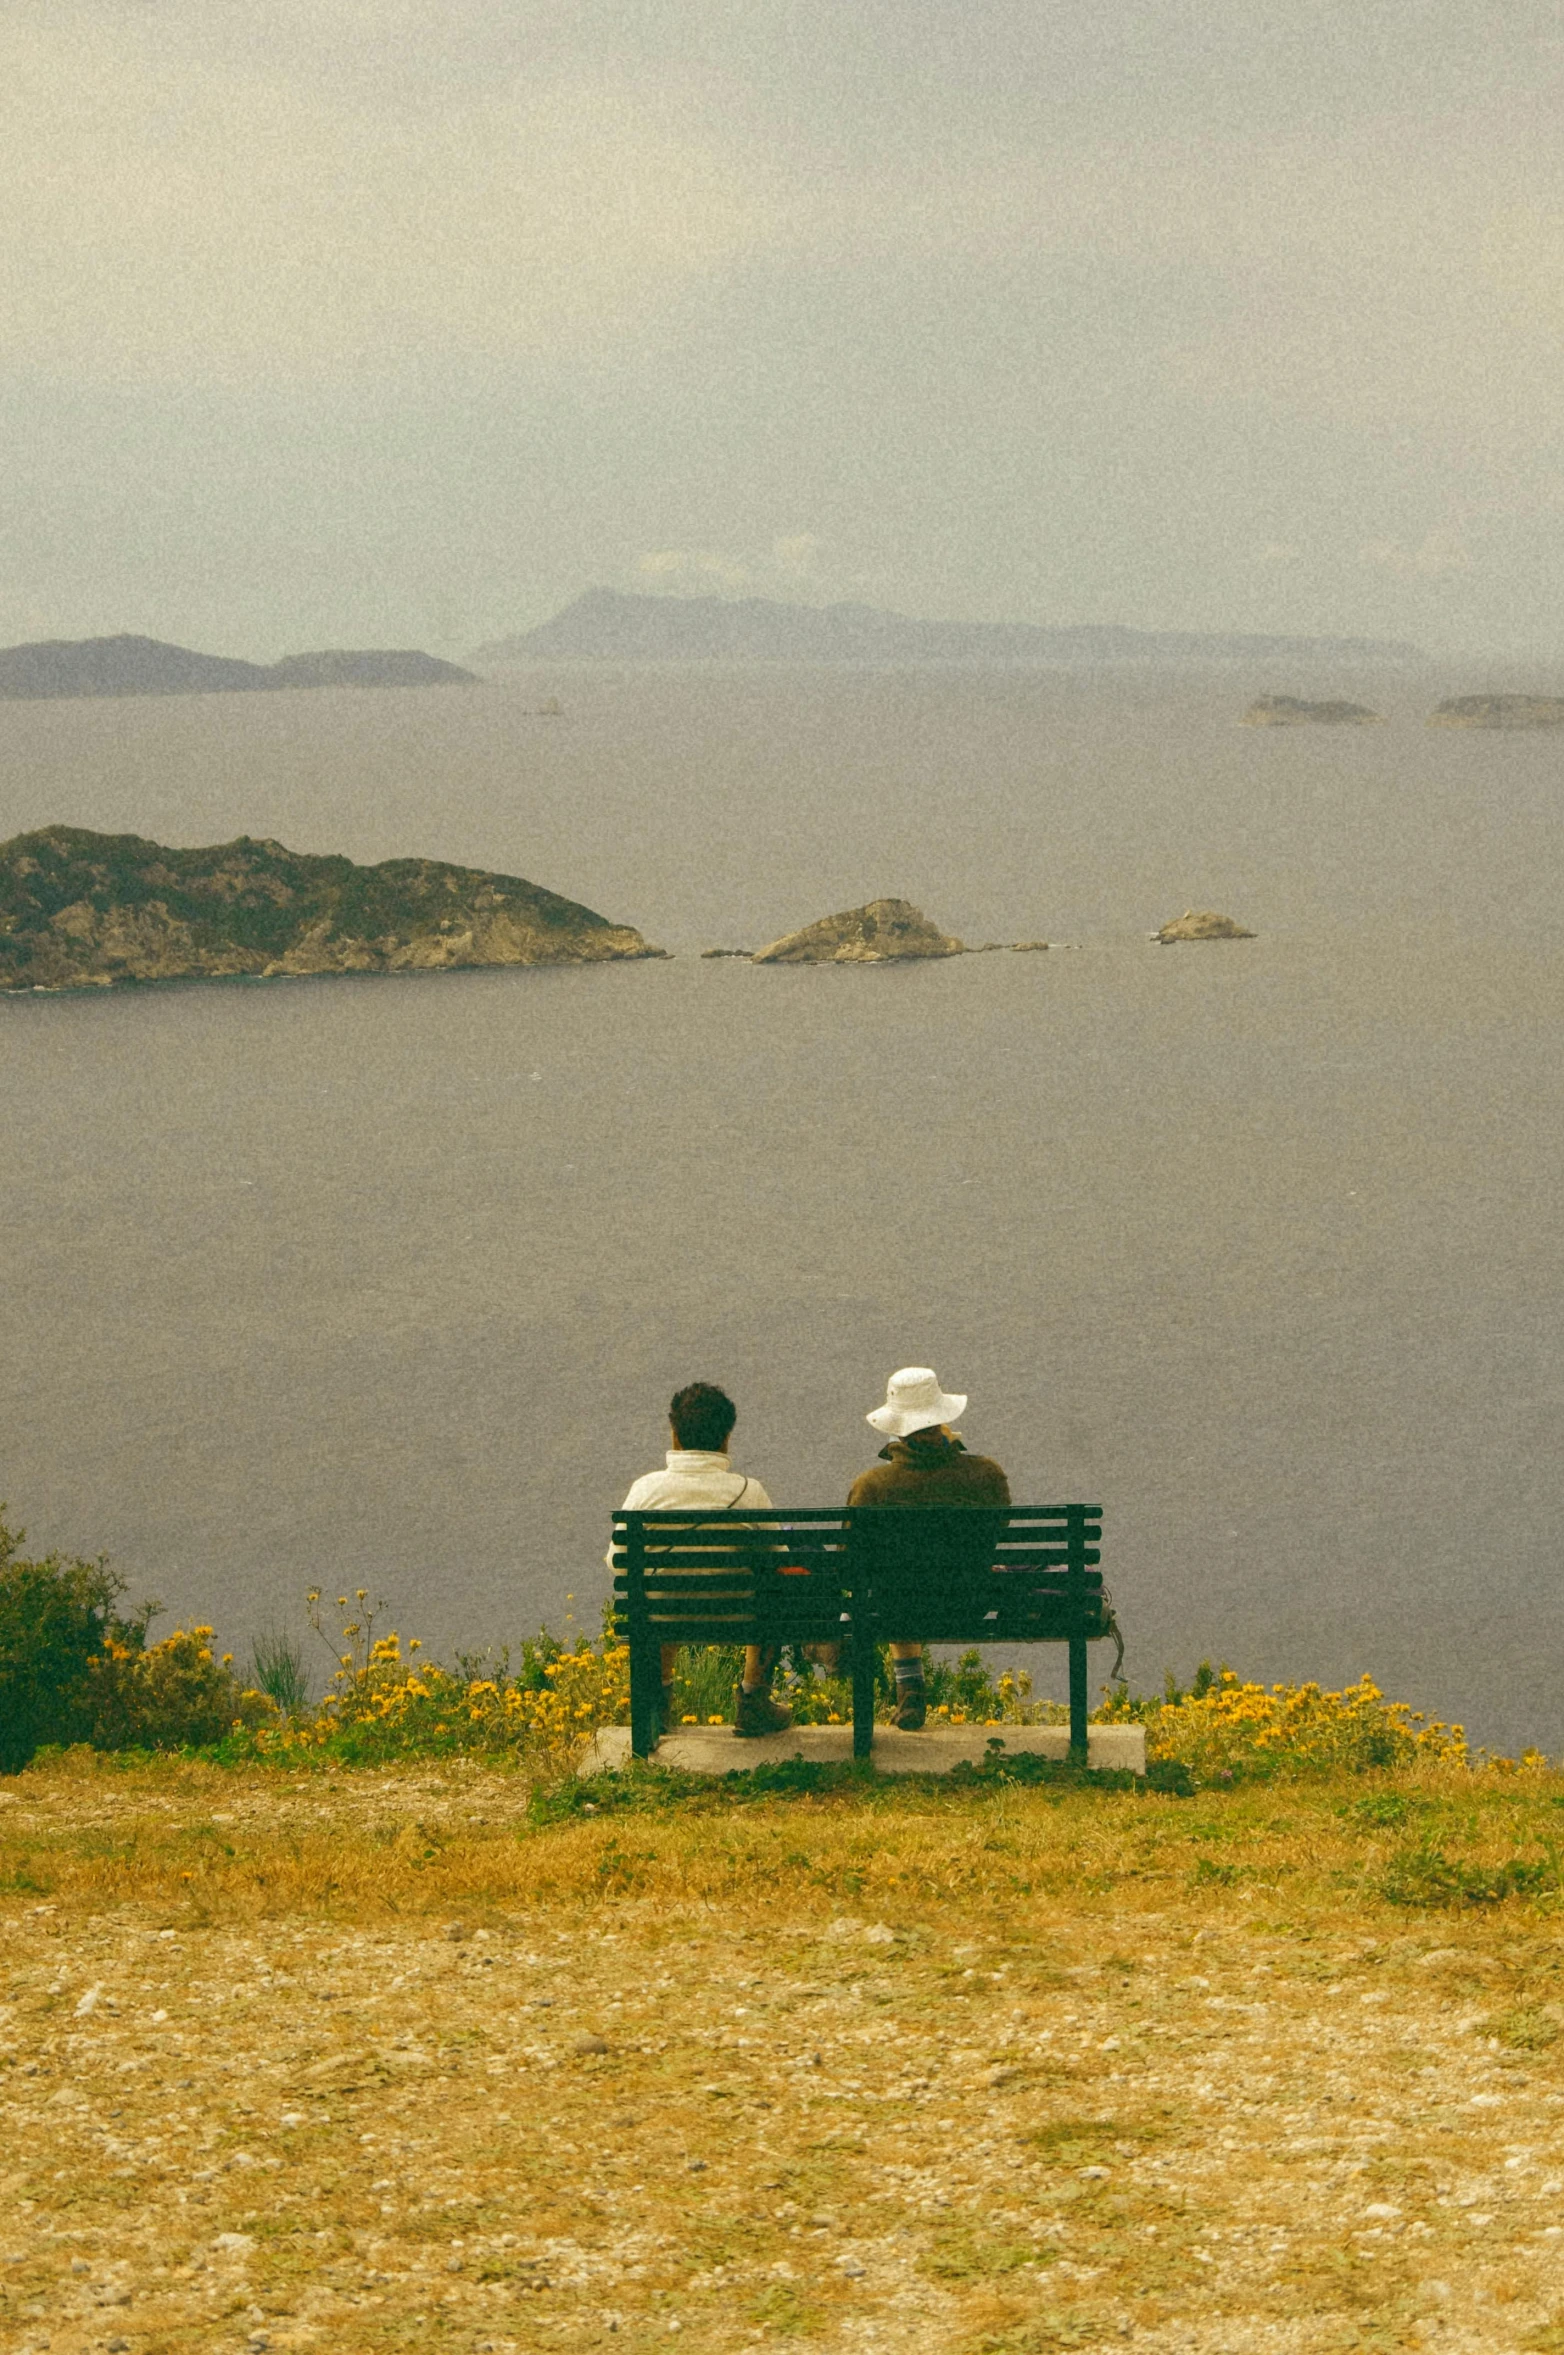 two people are sitting on a bench overlooking the ocean